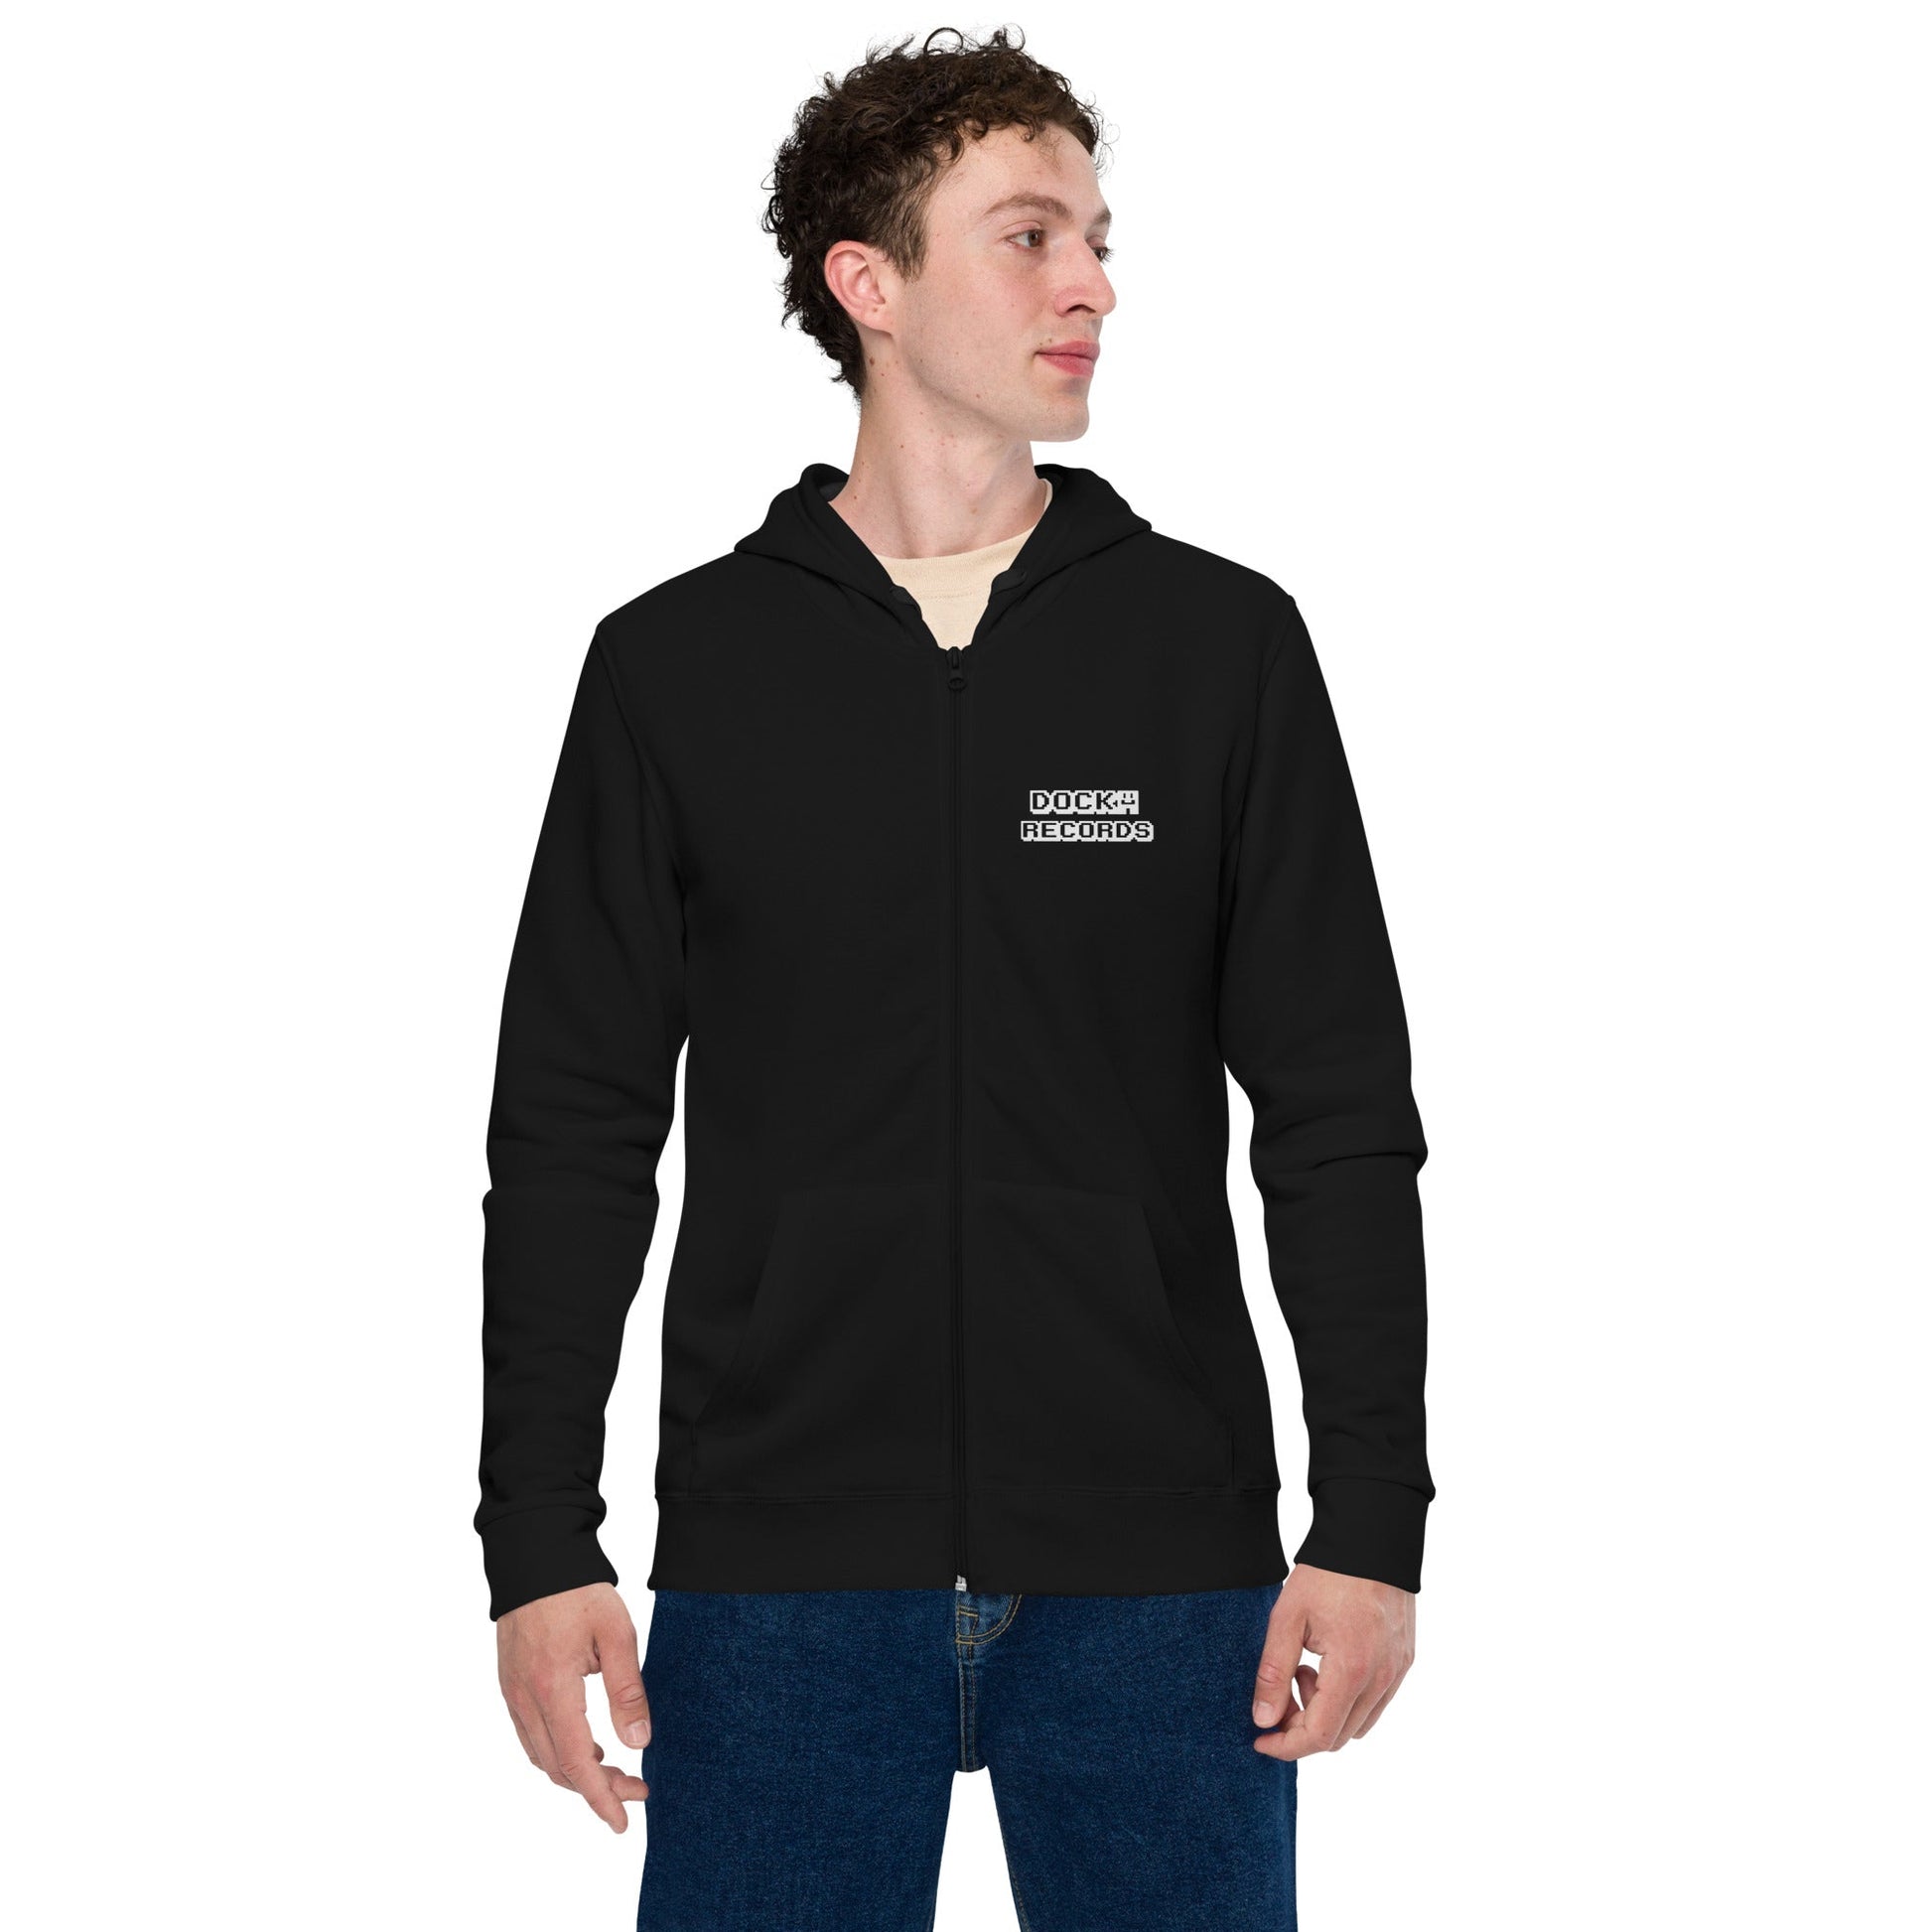 Doca Records Boots and Cats Unisex Zip-up Hoodie - BeExtra! Apparel & More